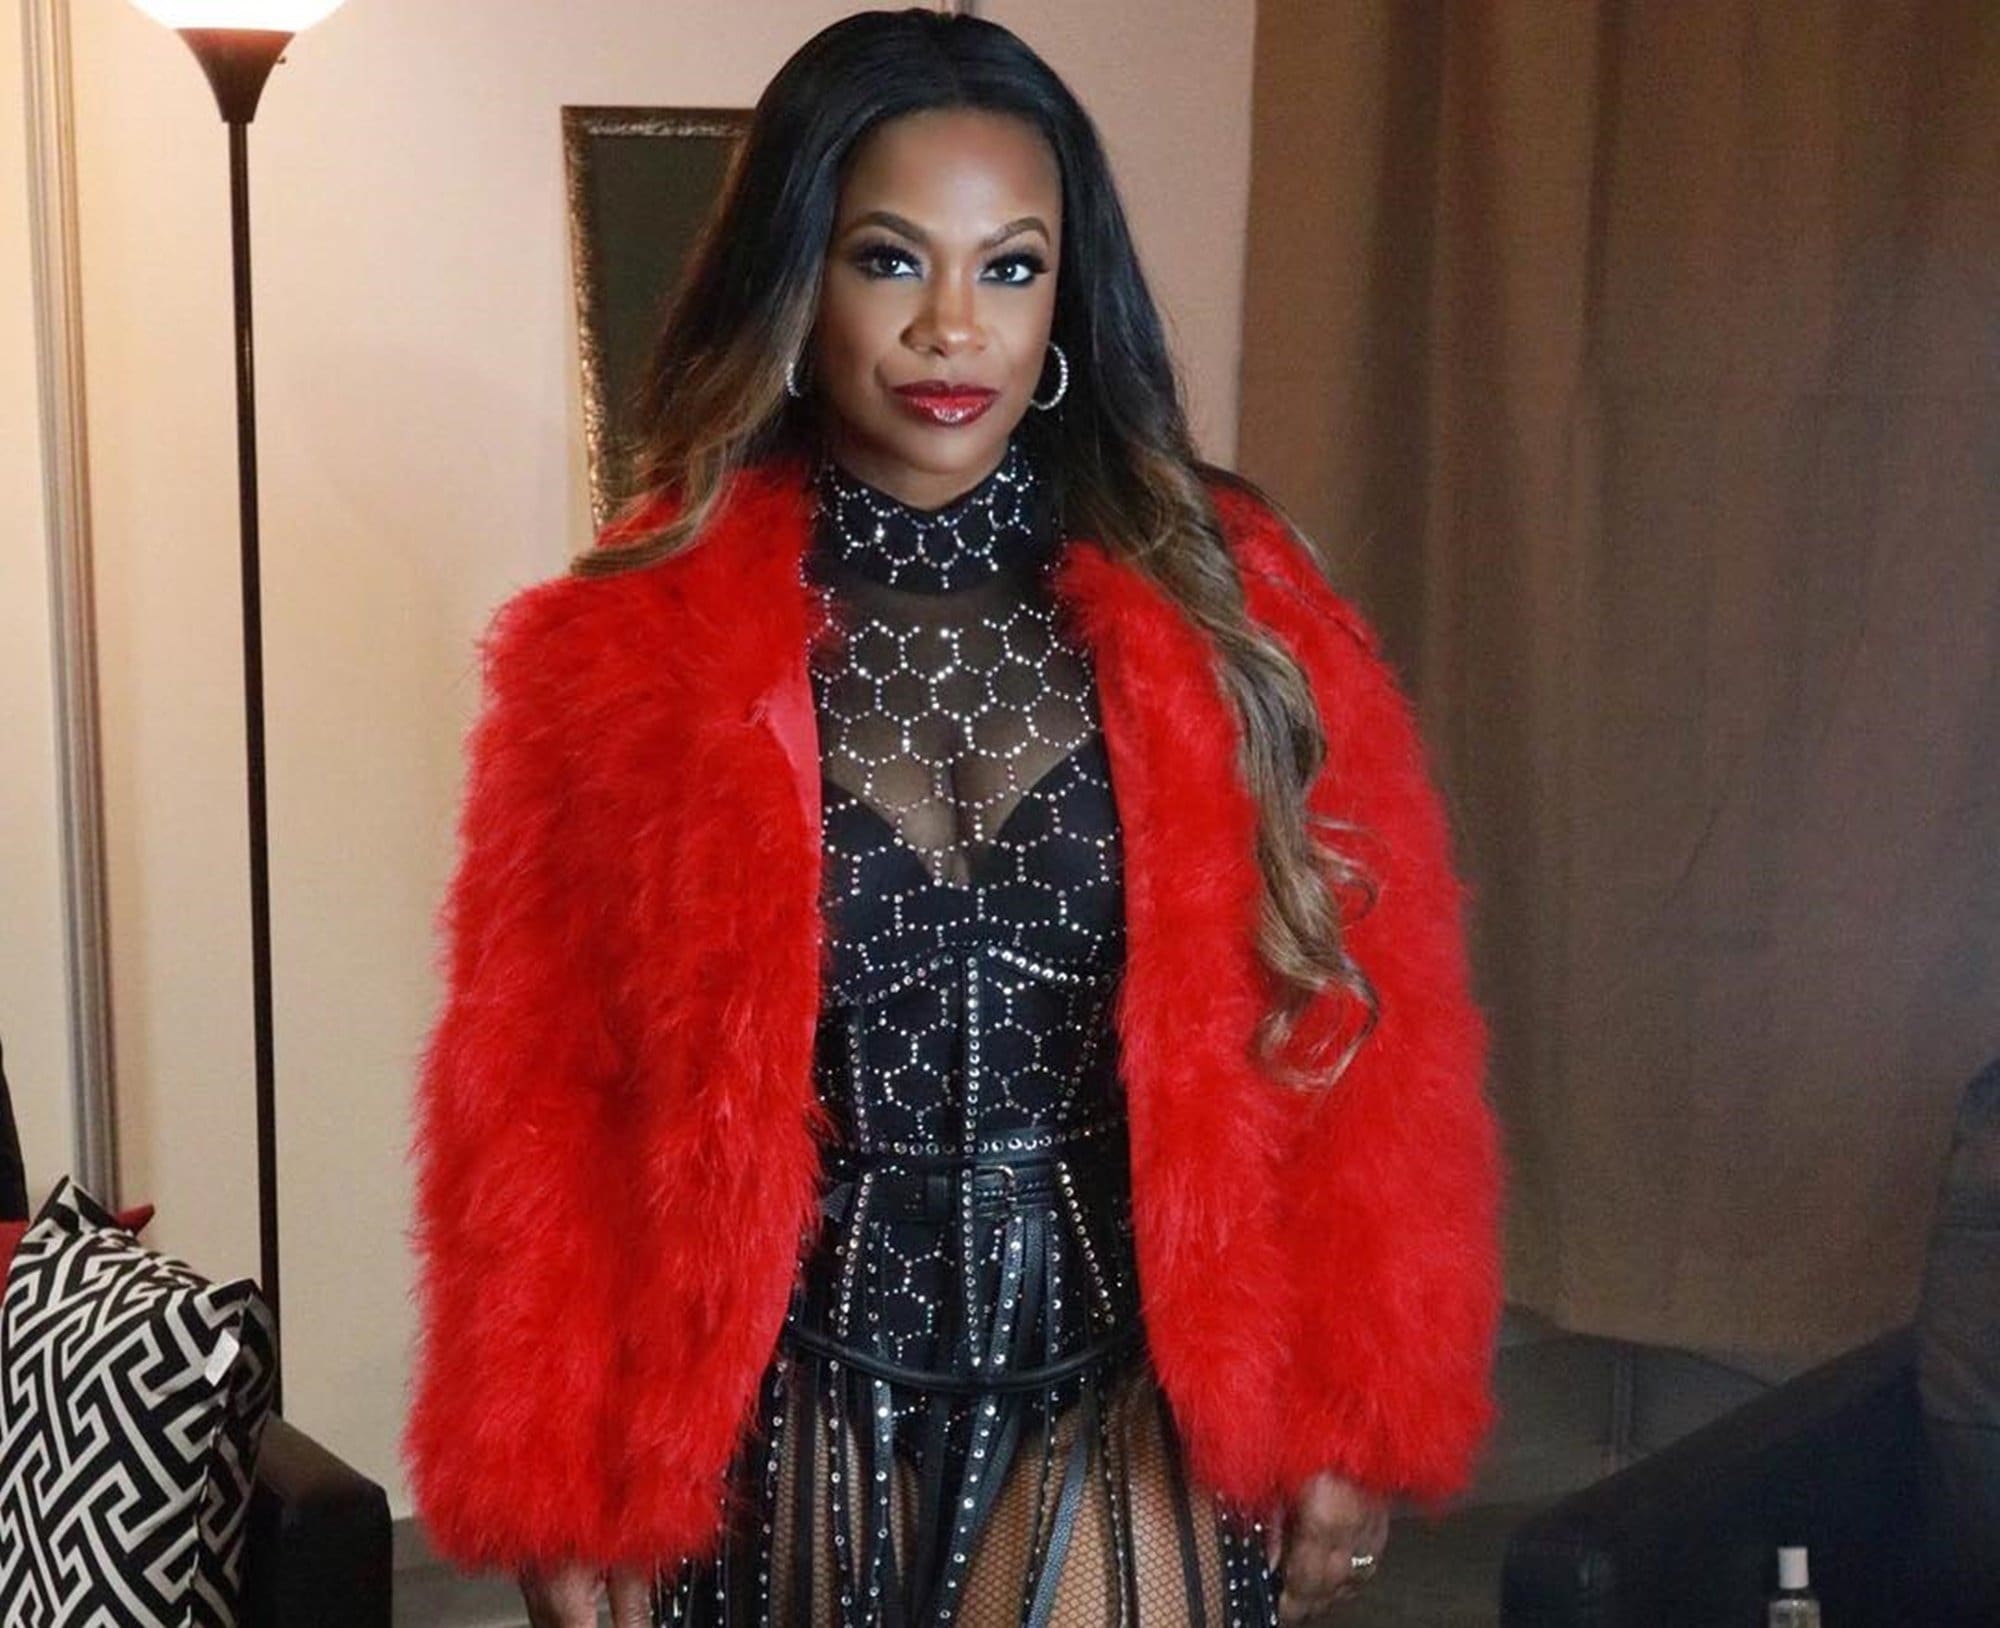 Kandi Burruss Hangs Out With Her Favourite Guys - See Her Photo And Their Elegant Outfits